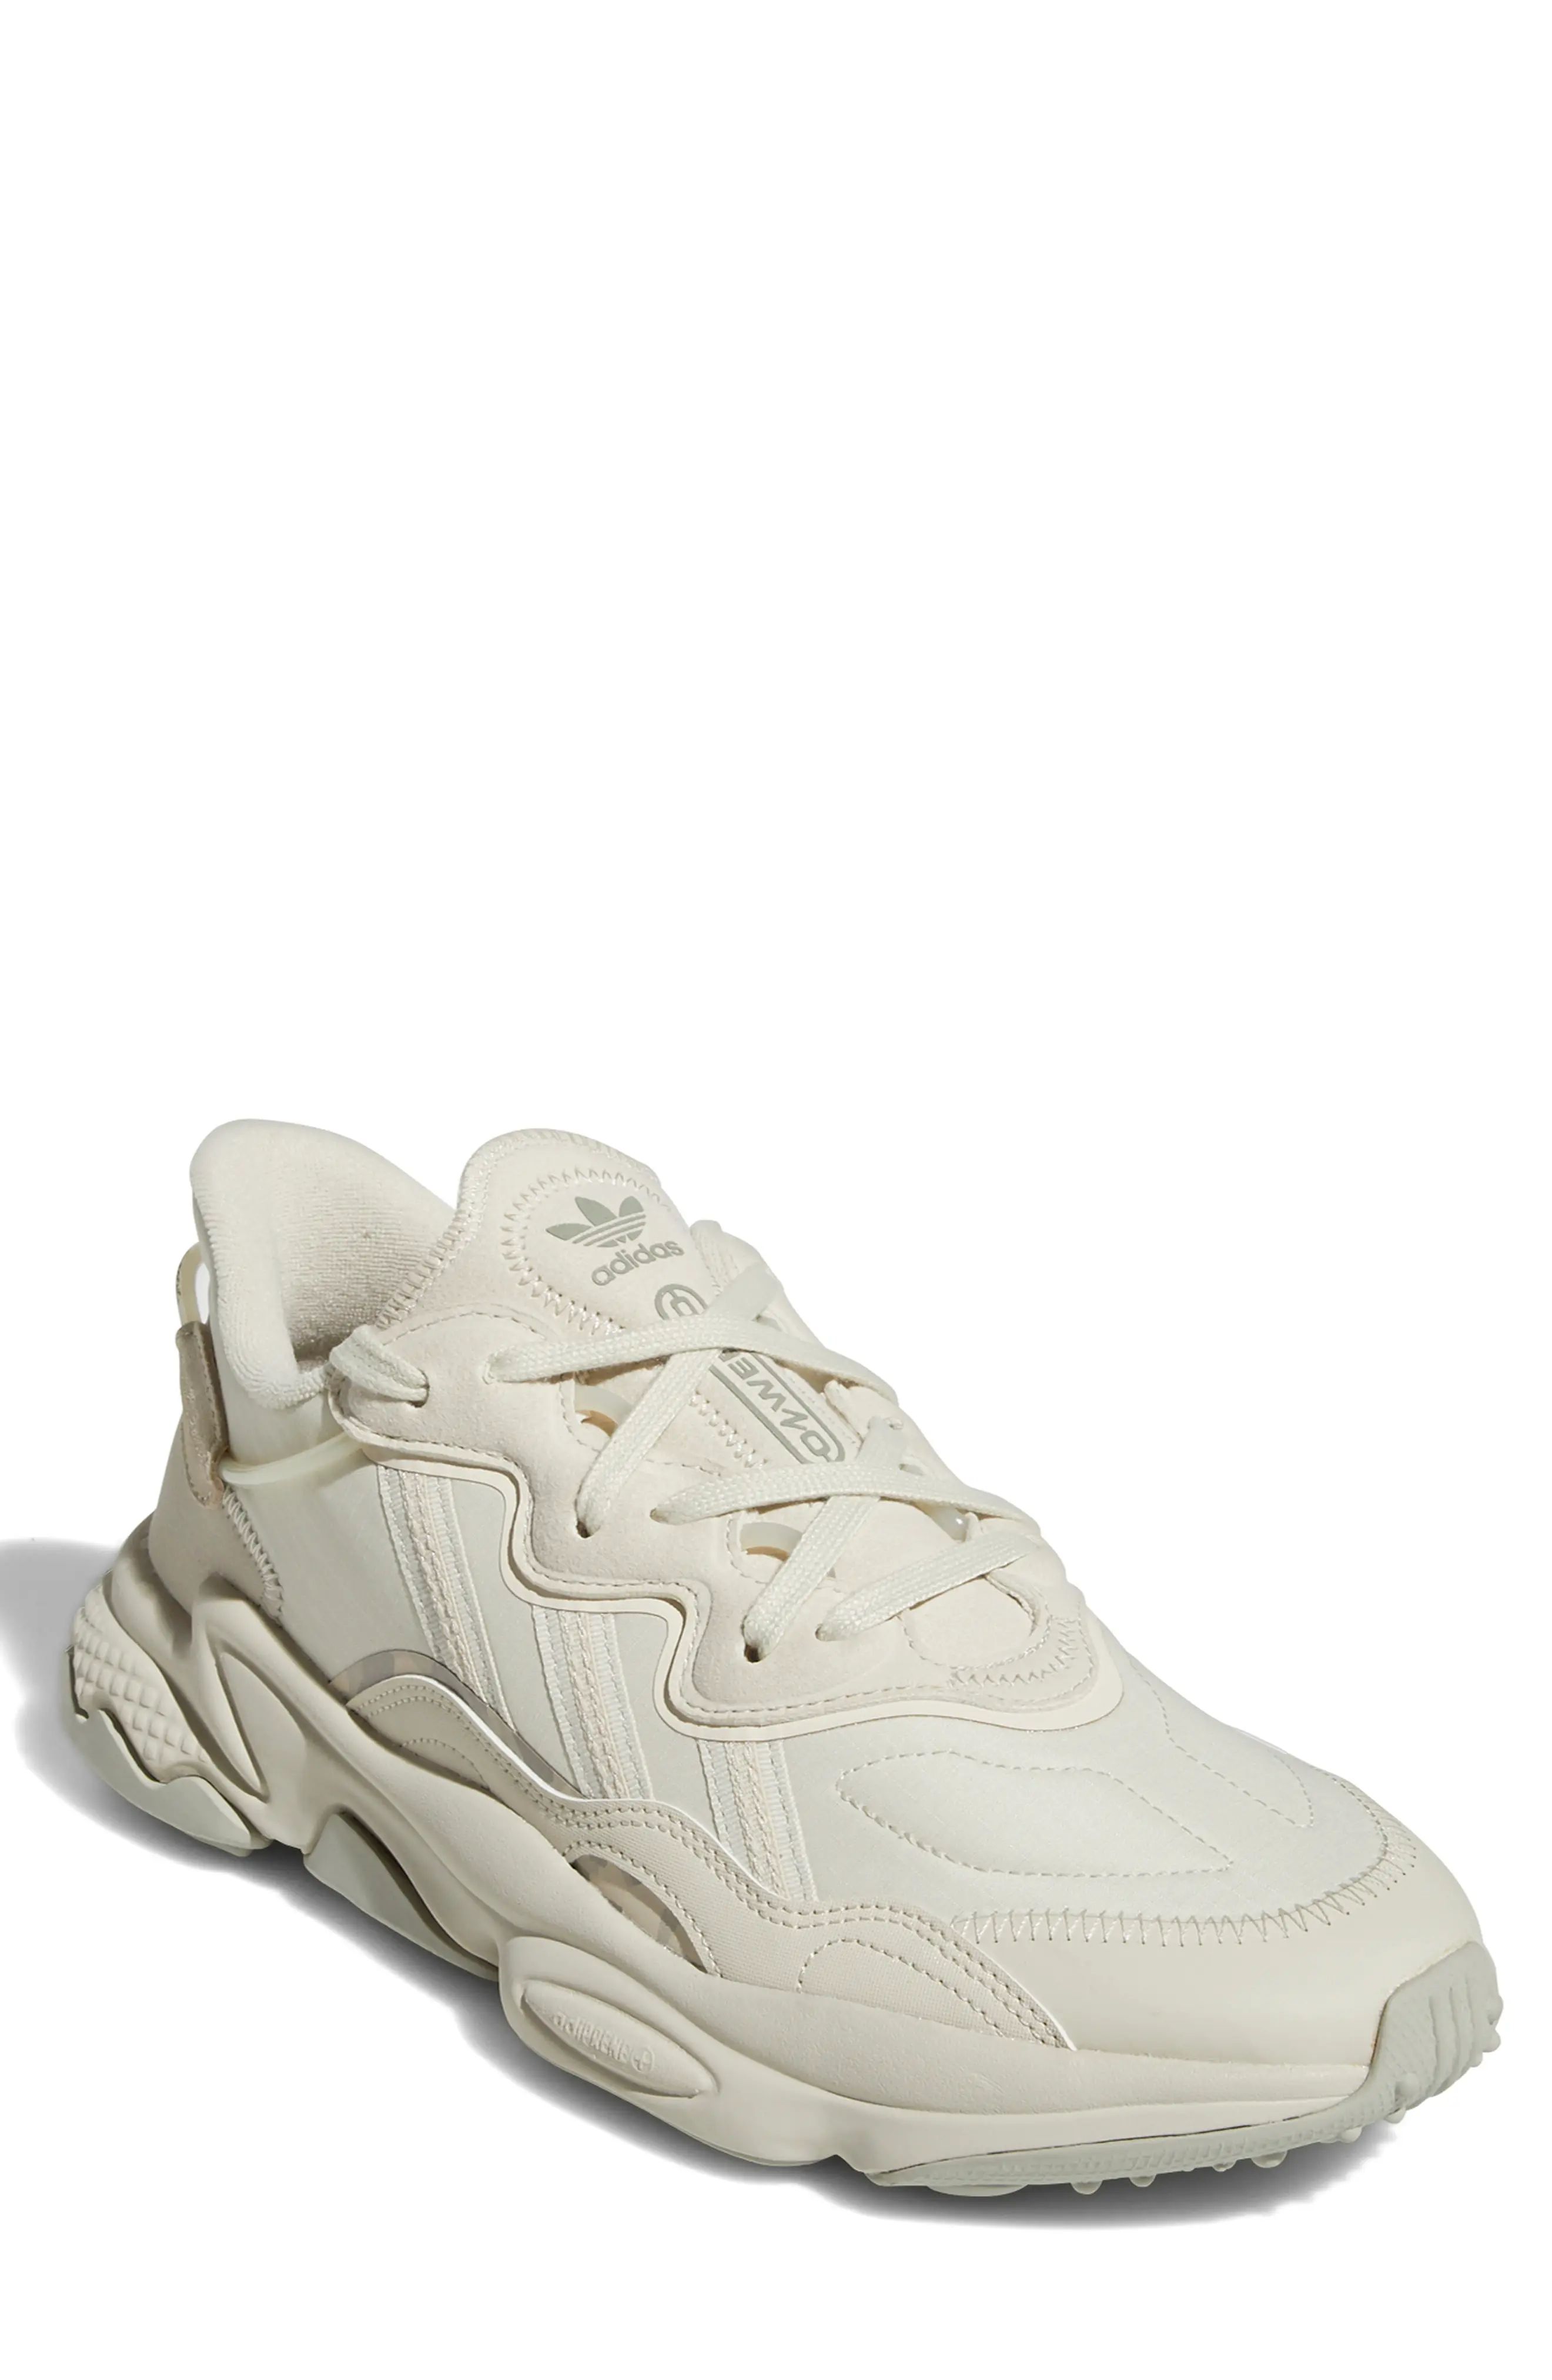 adidas Ozweego Sneaker in Alumina/Metal Grey/White at Nordstrom, Size 10.5 | Nordstrom